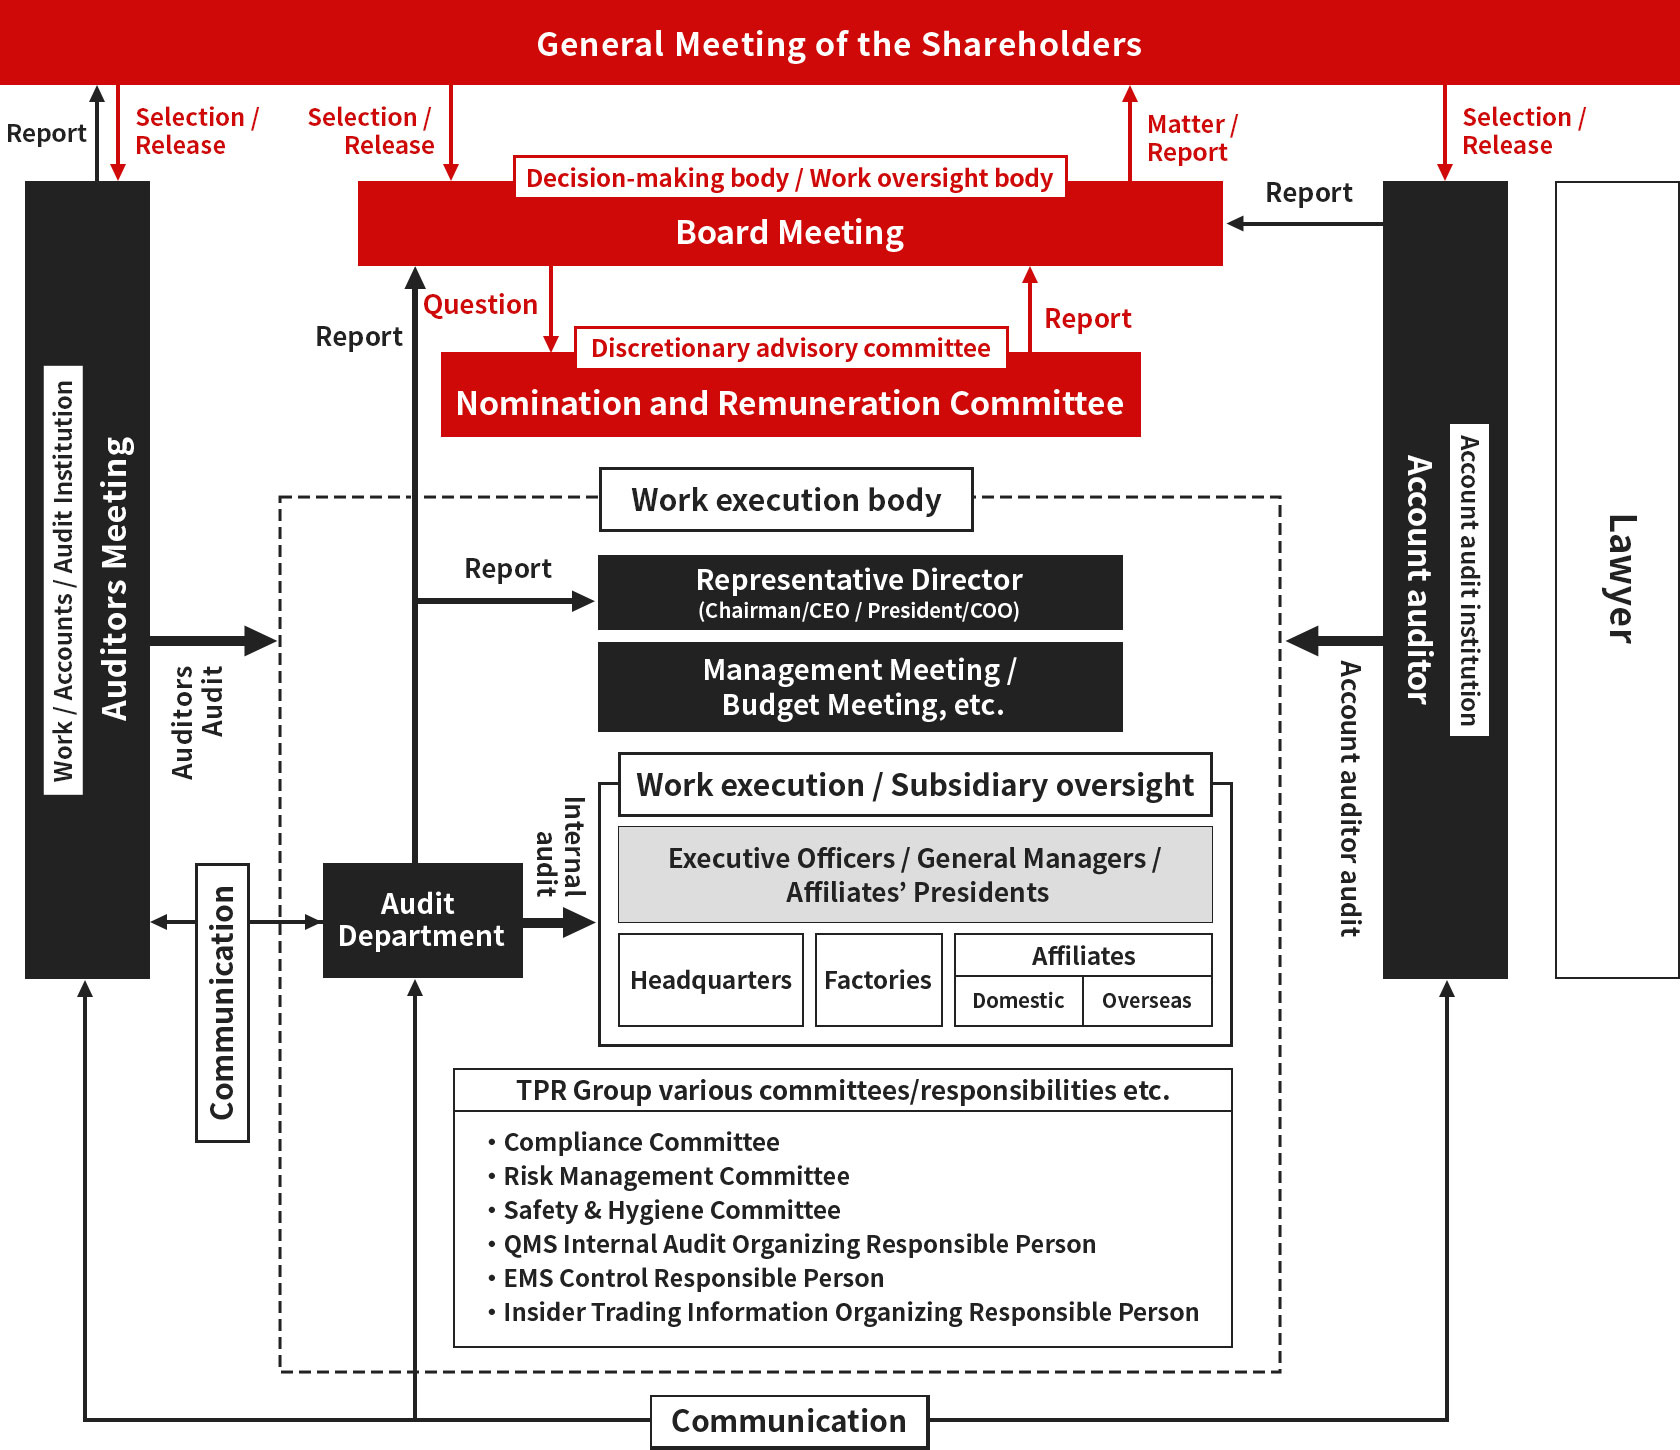 Outline of Corporate Governance structure